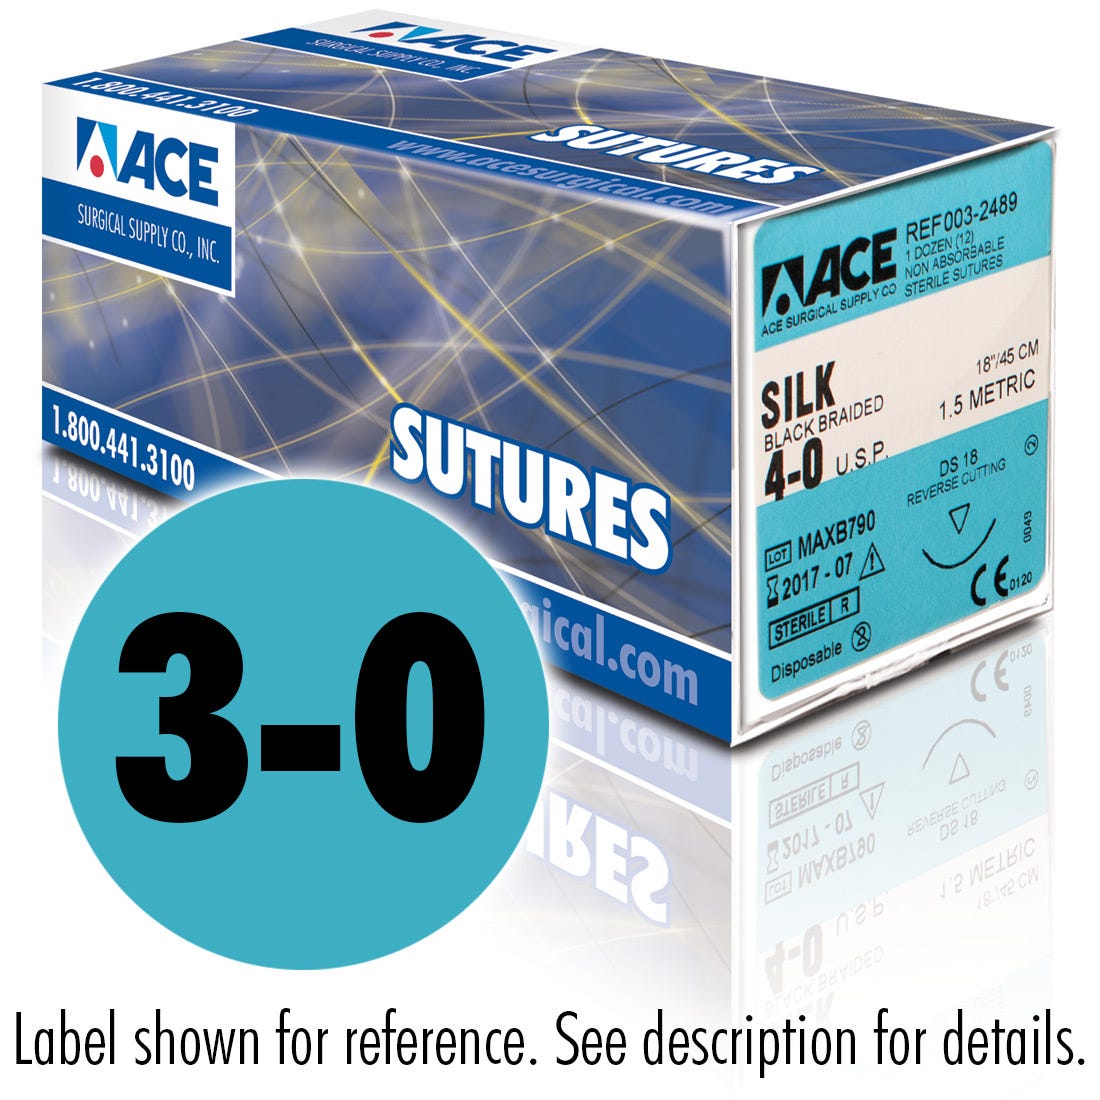 ACE 3-0 Black Braided Silk Sutures, DS18, 18"- 12/Box